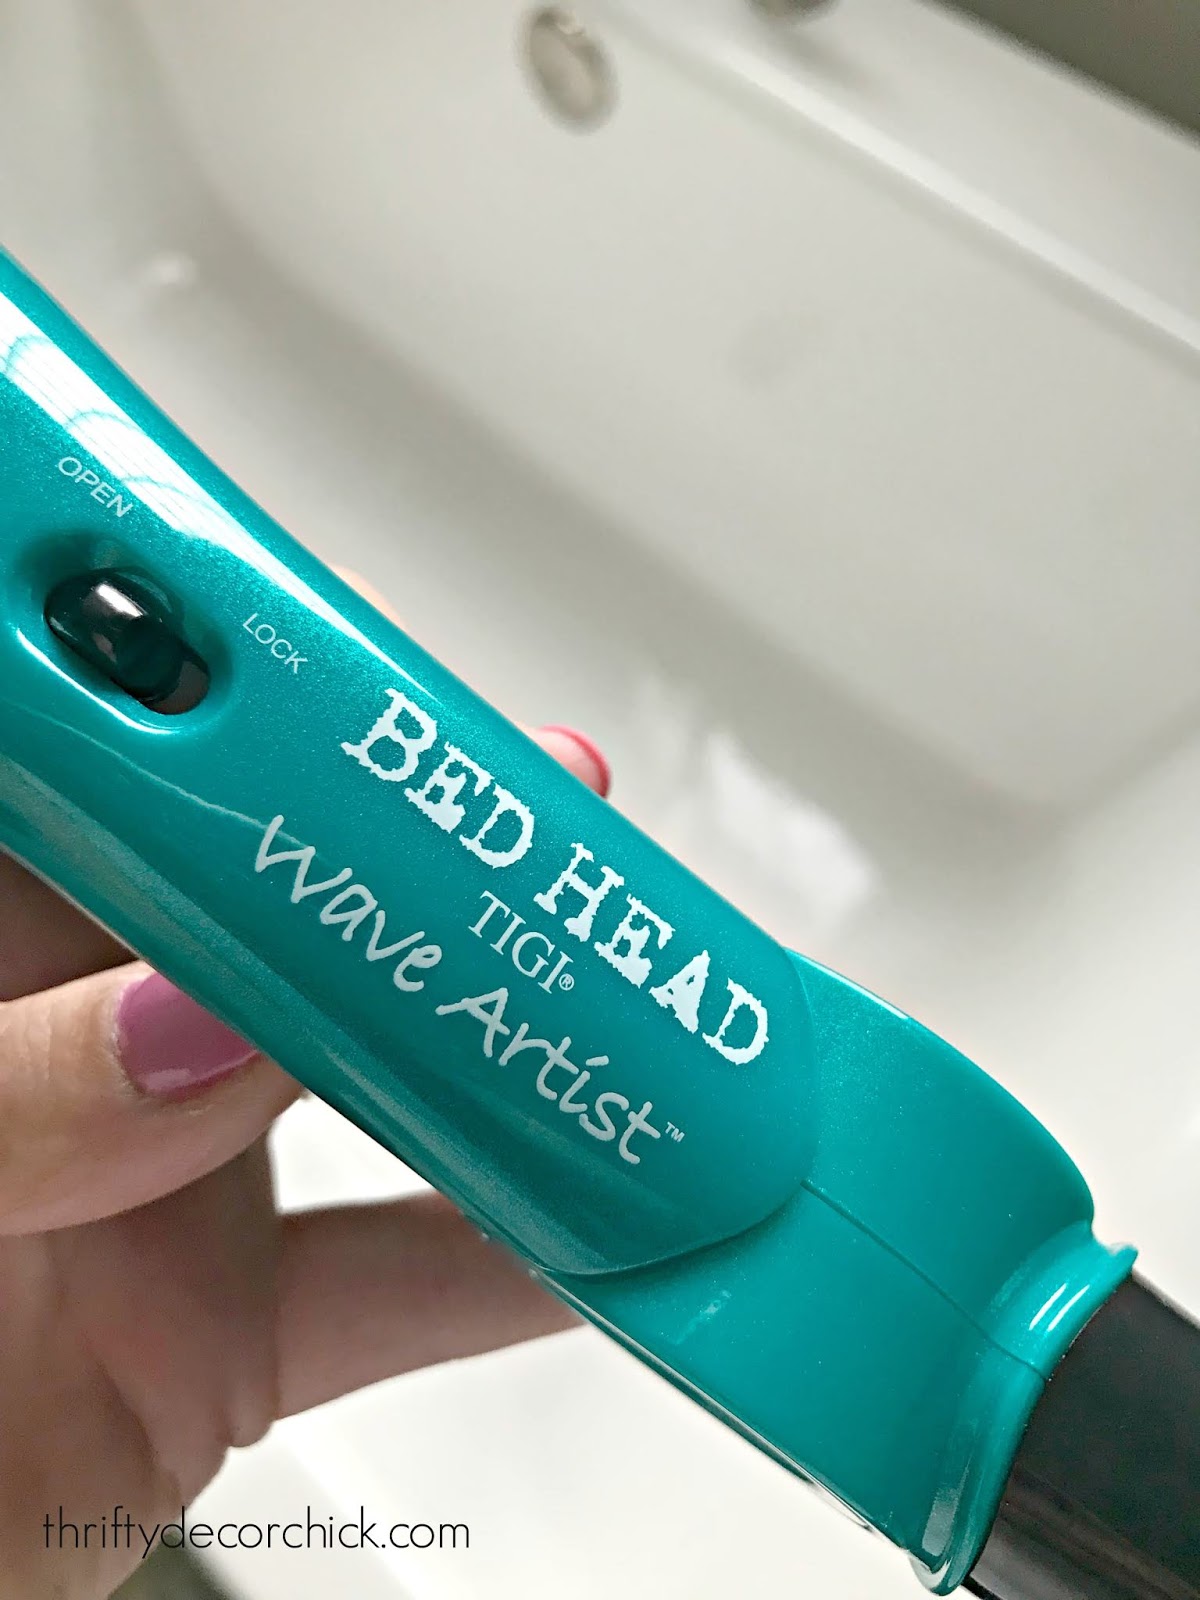 Great hair tool for beauty waves